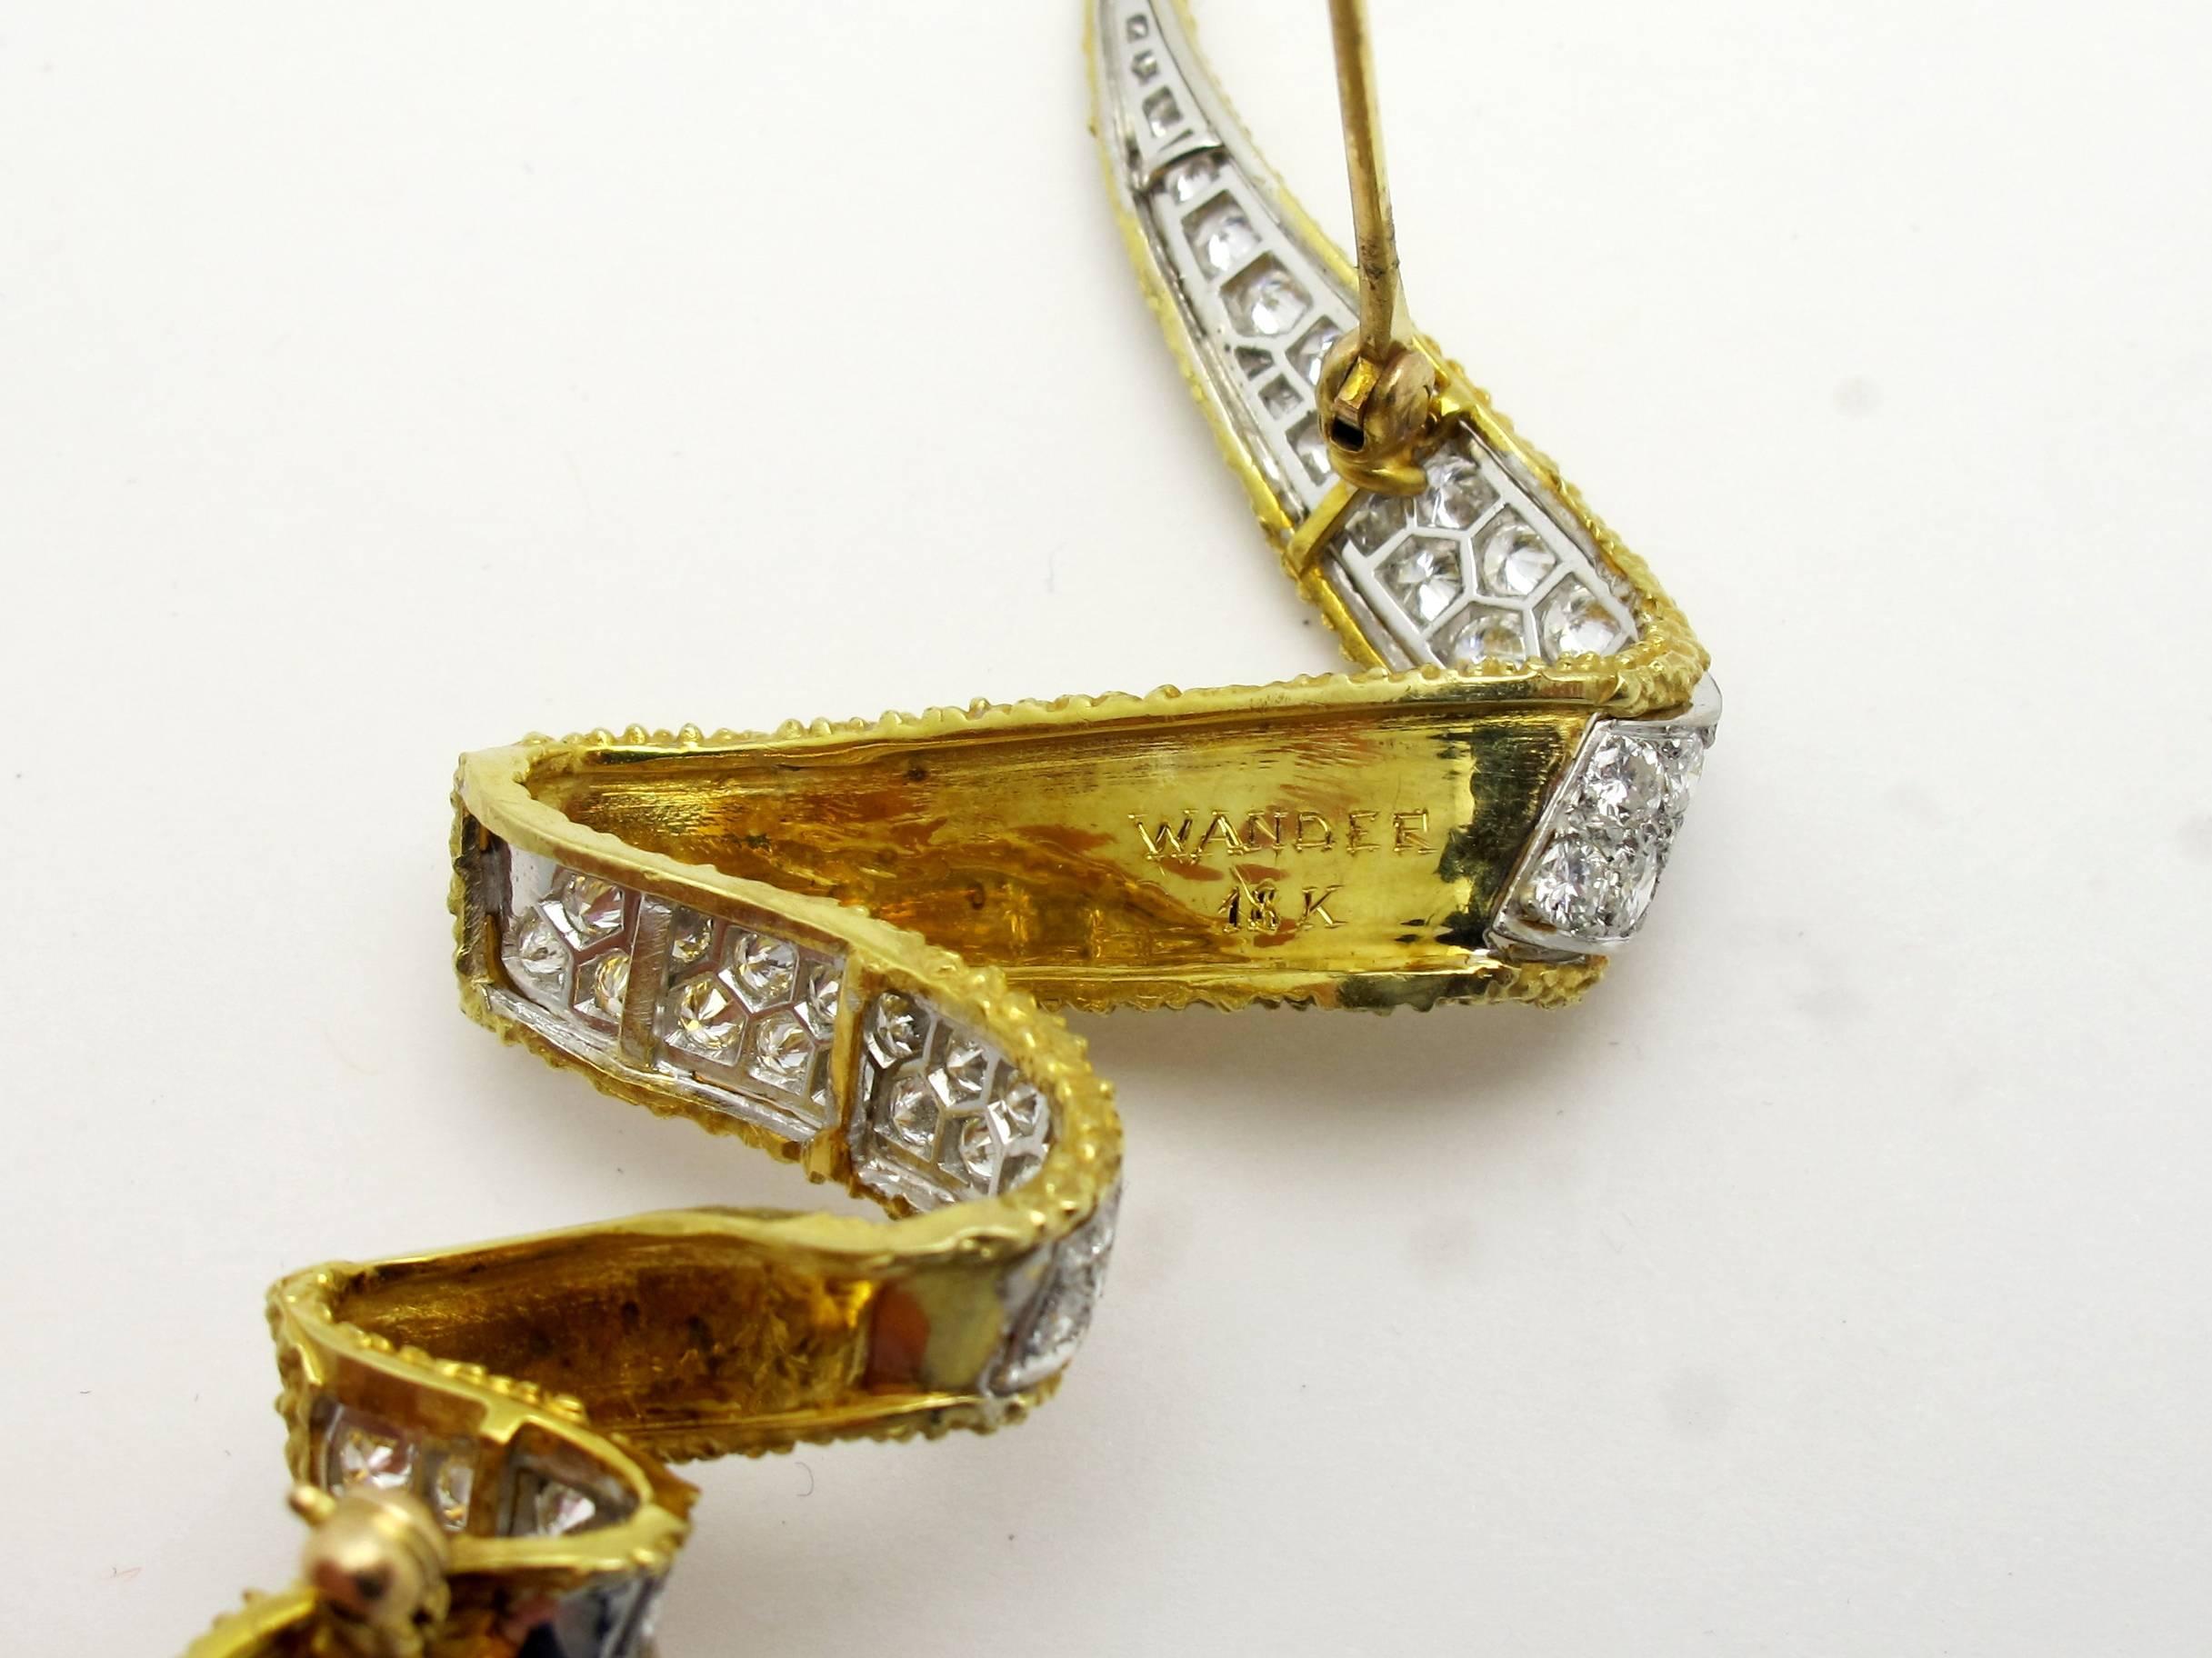 Wander Diamond Gold Ribbon Brooch In Excellent Condition For Sale In Santa Fe, NM